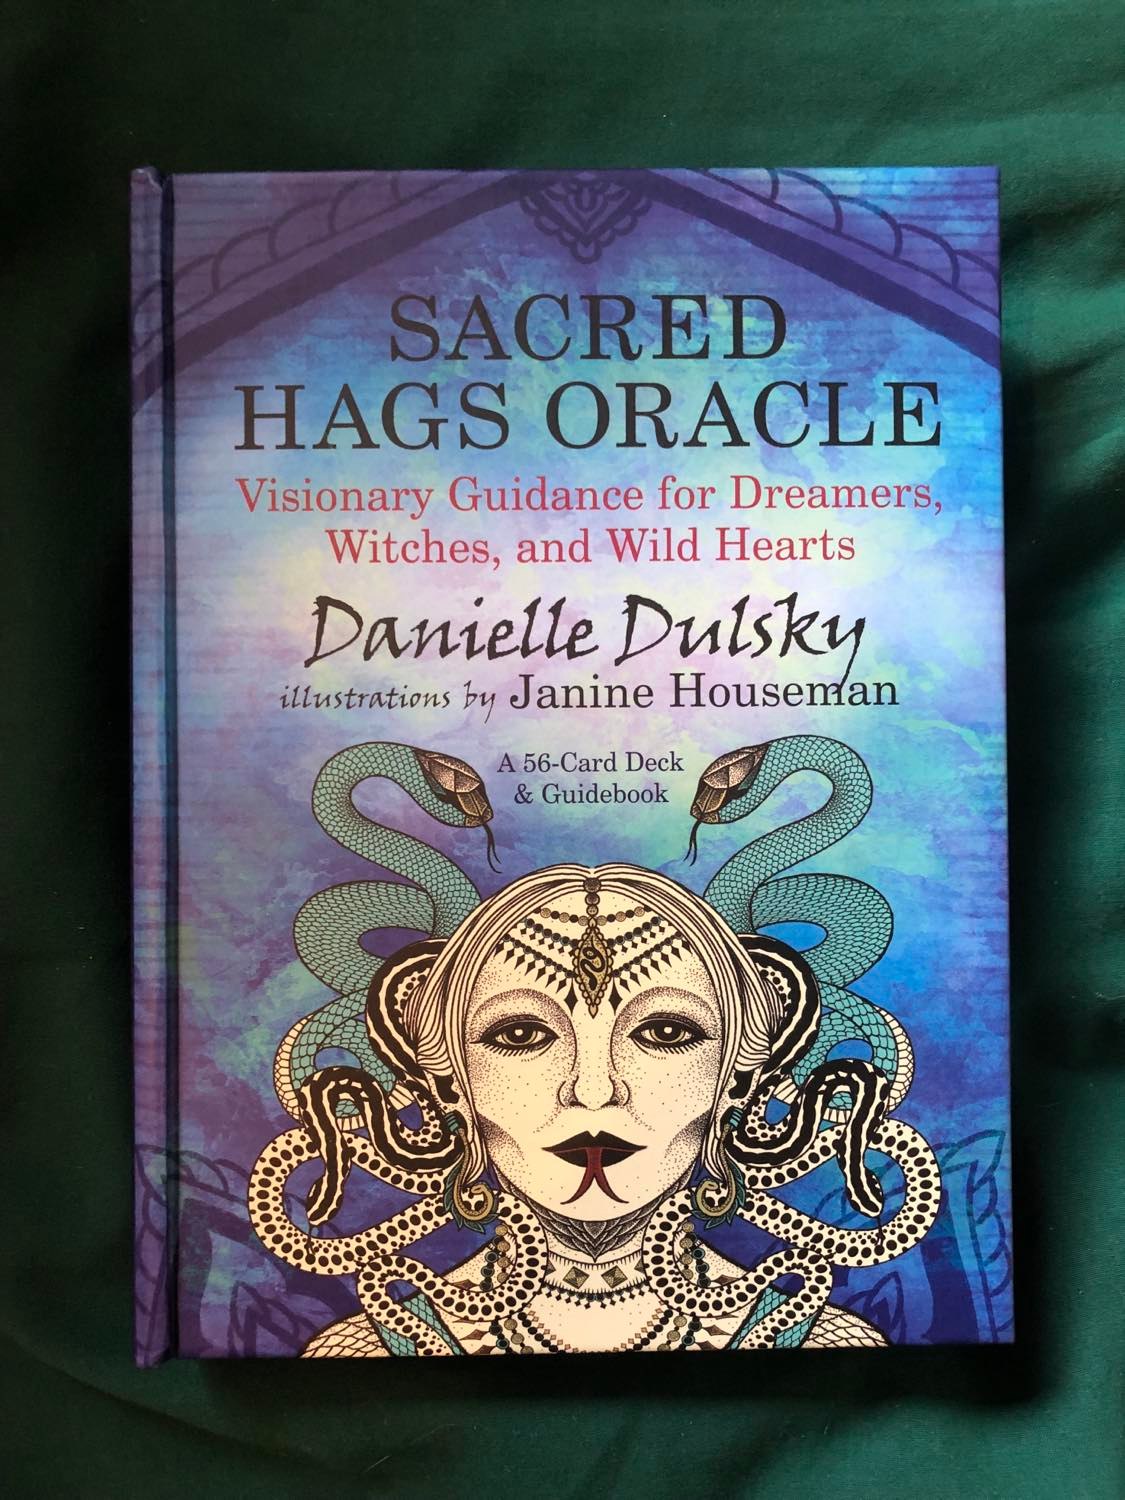 The box for the Sacred Hags Oracle, sitting on a green fabric surface.